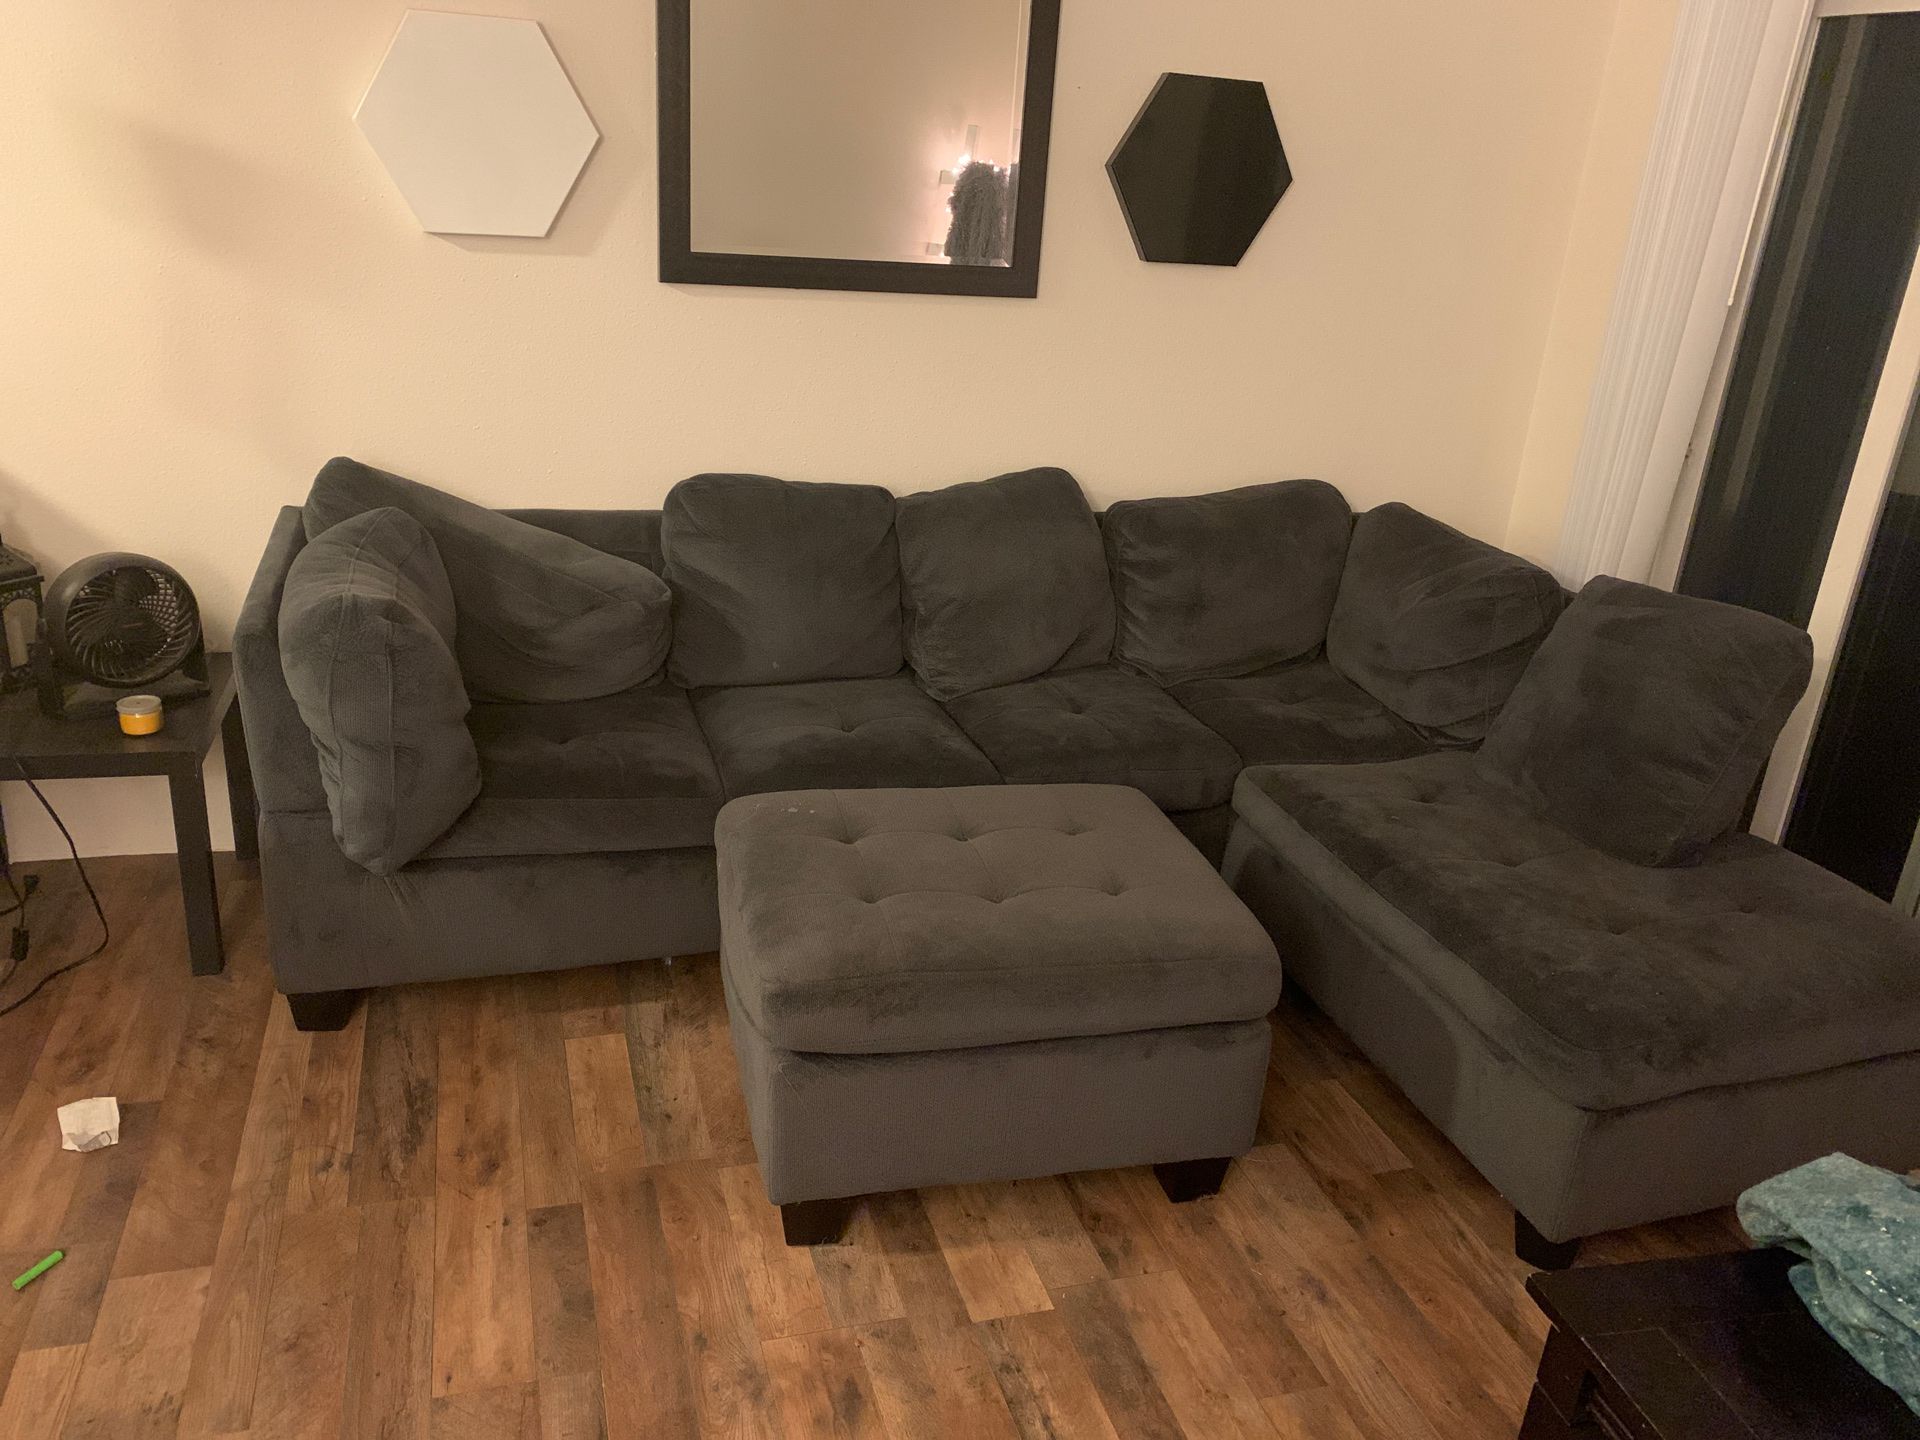 Free Couch & ottoman